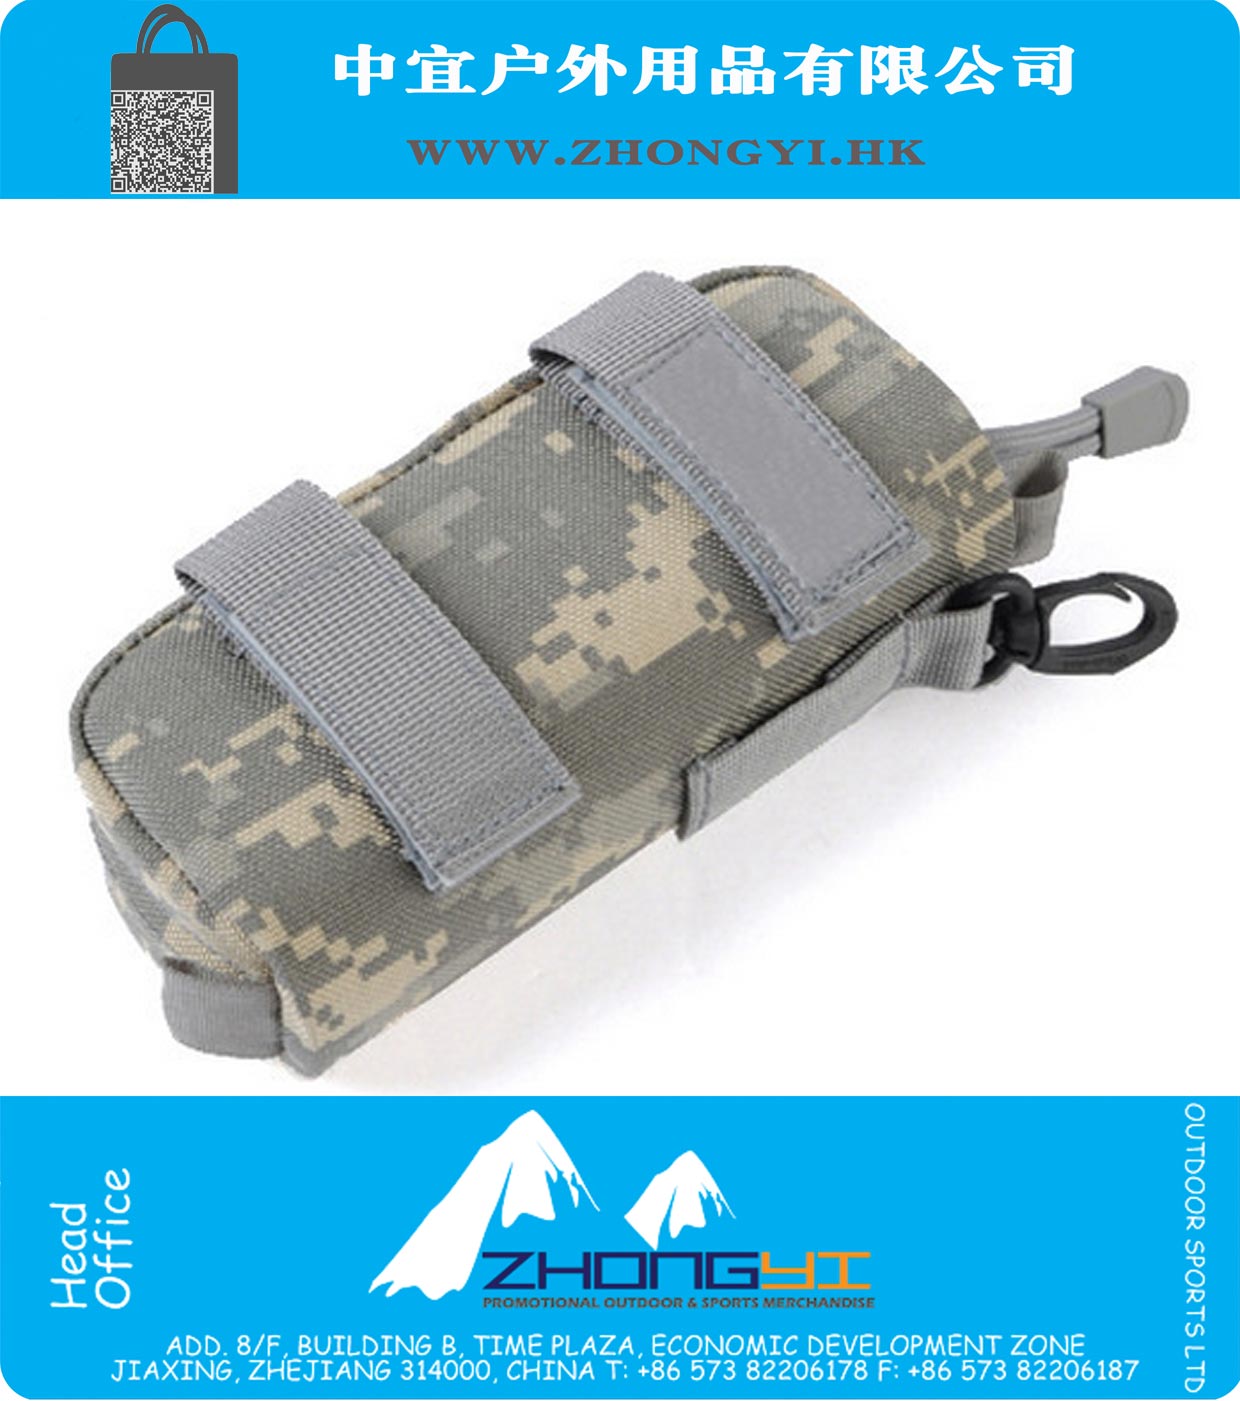 Military Sports High Quality Shockproof Glasses Bag